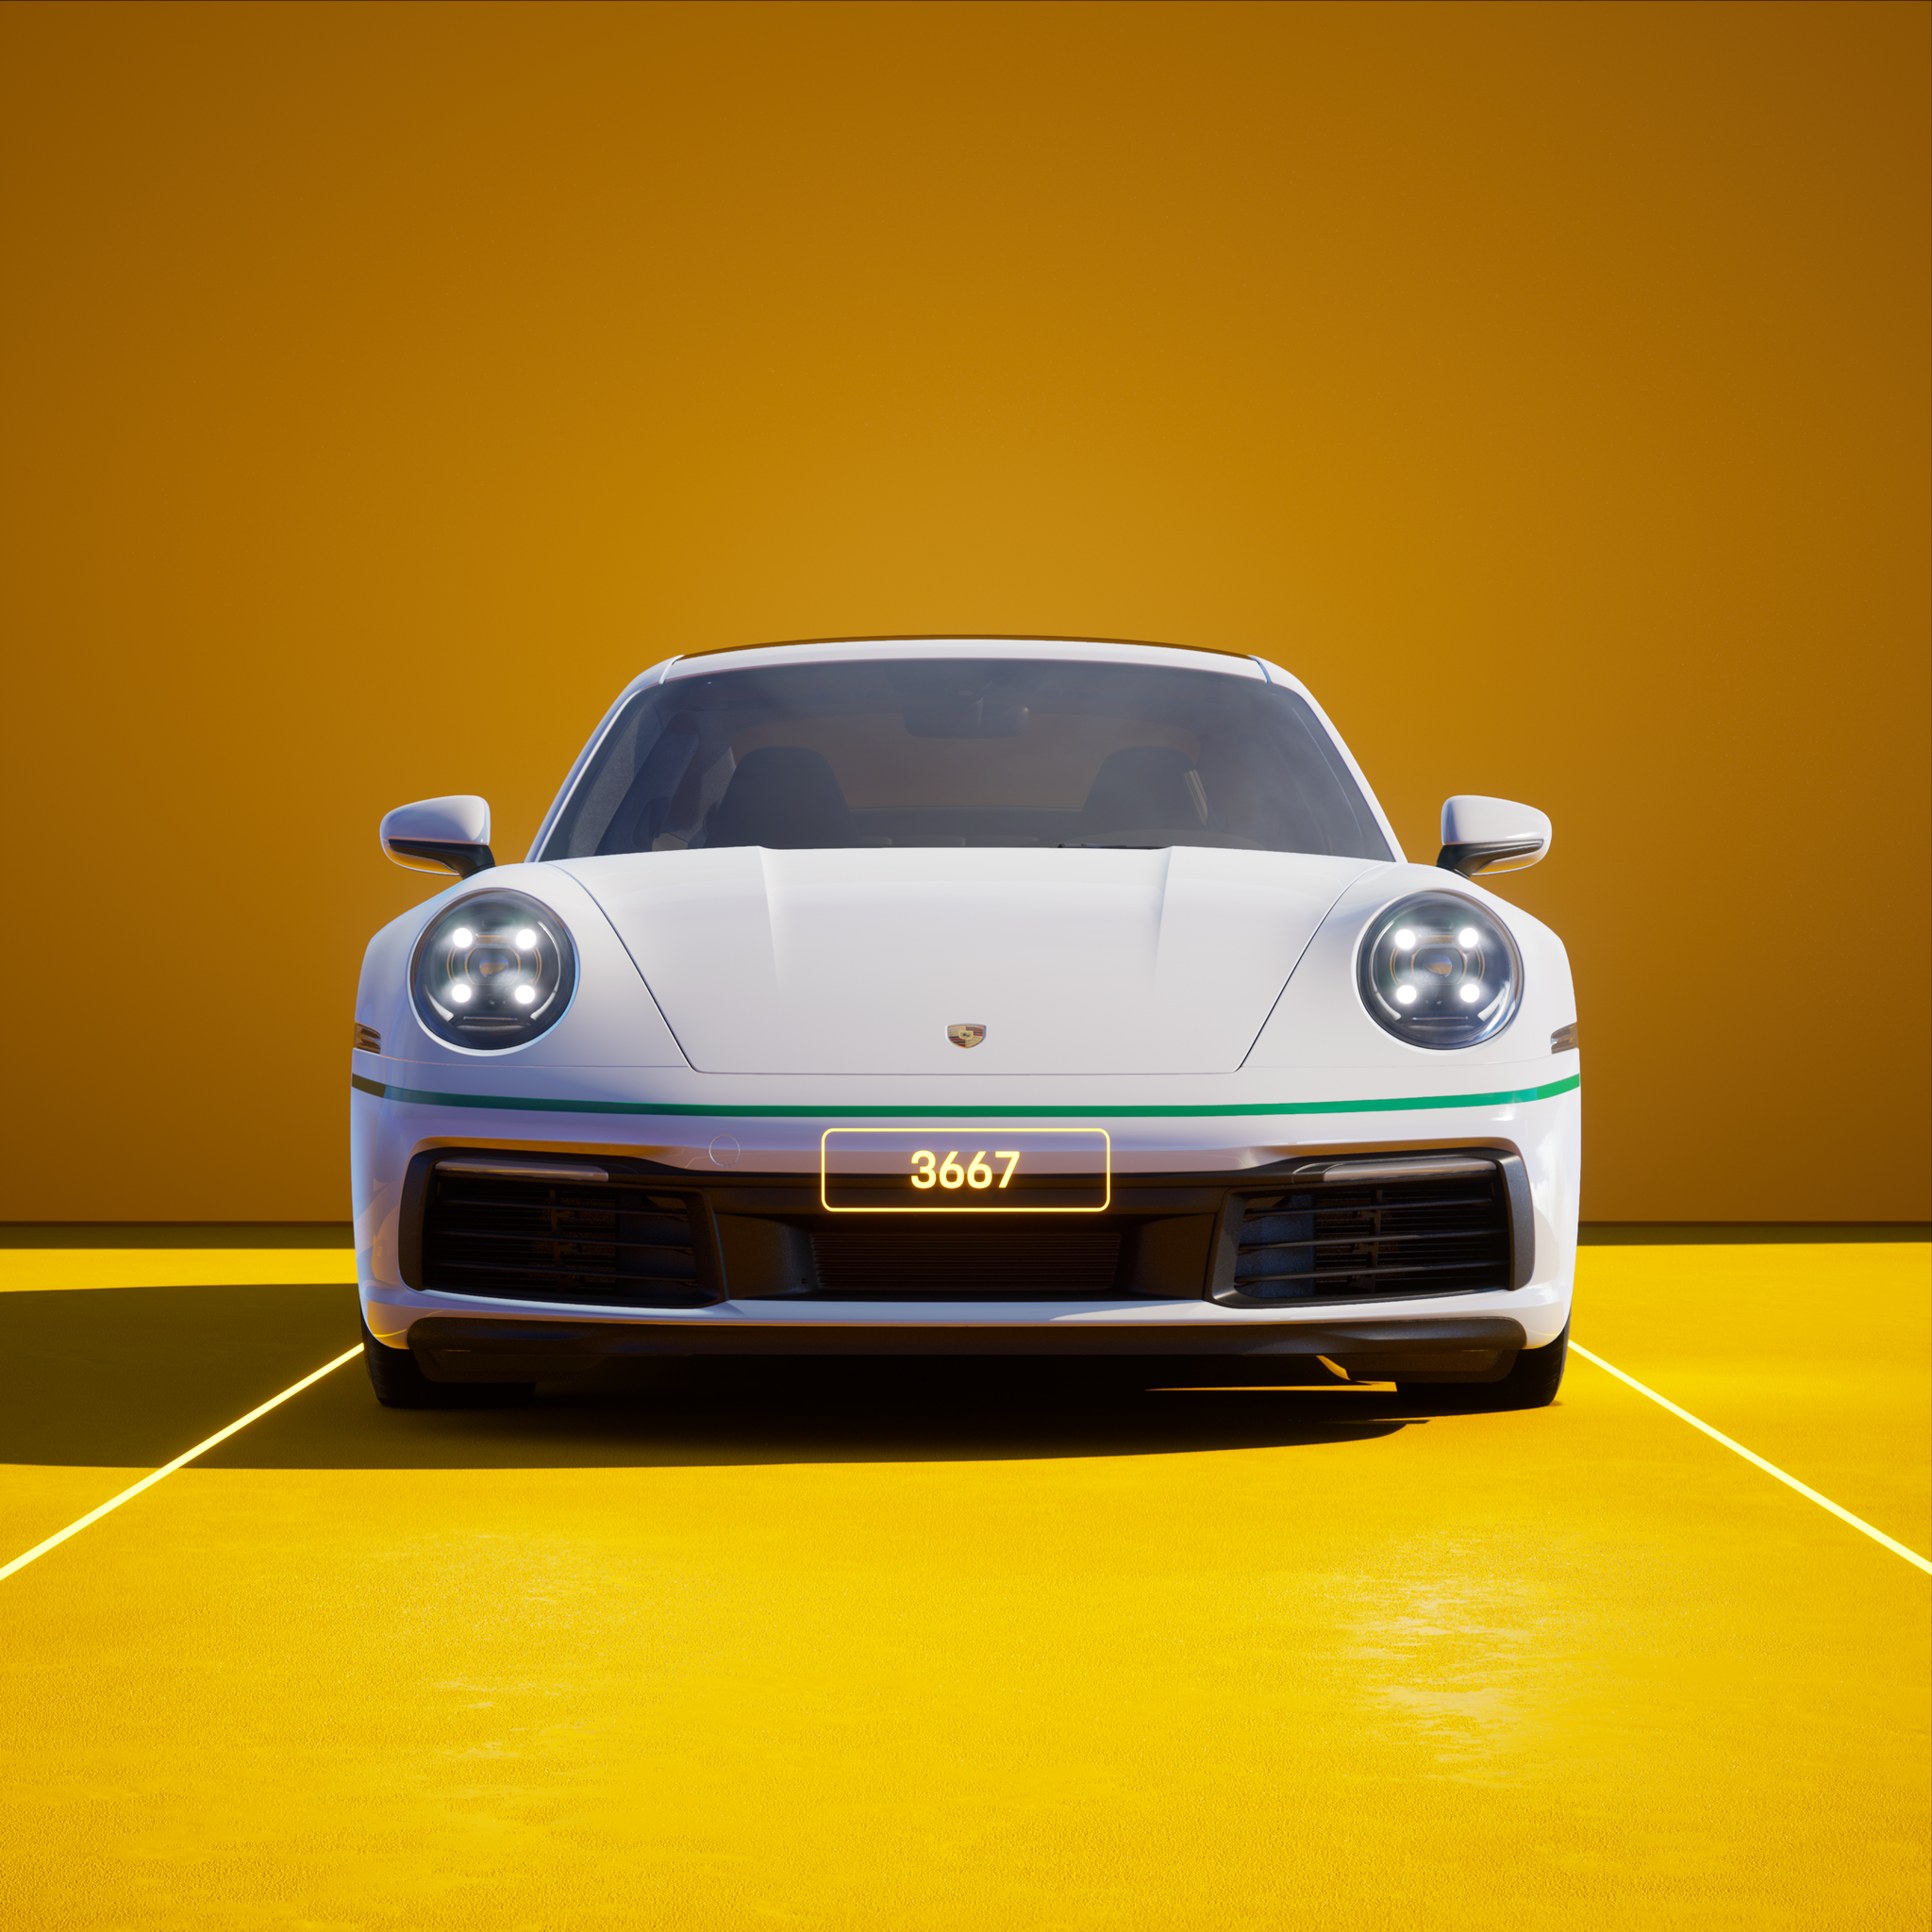 The PORSCHΞ 911 3667 image in phase